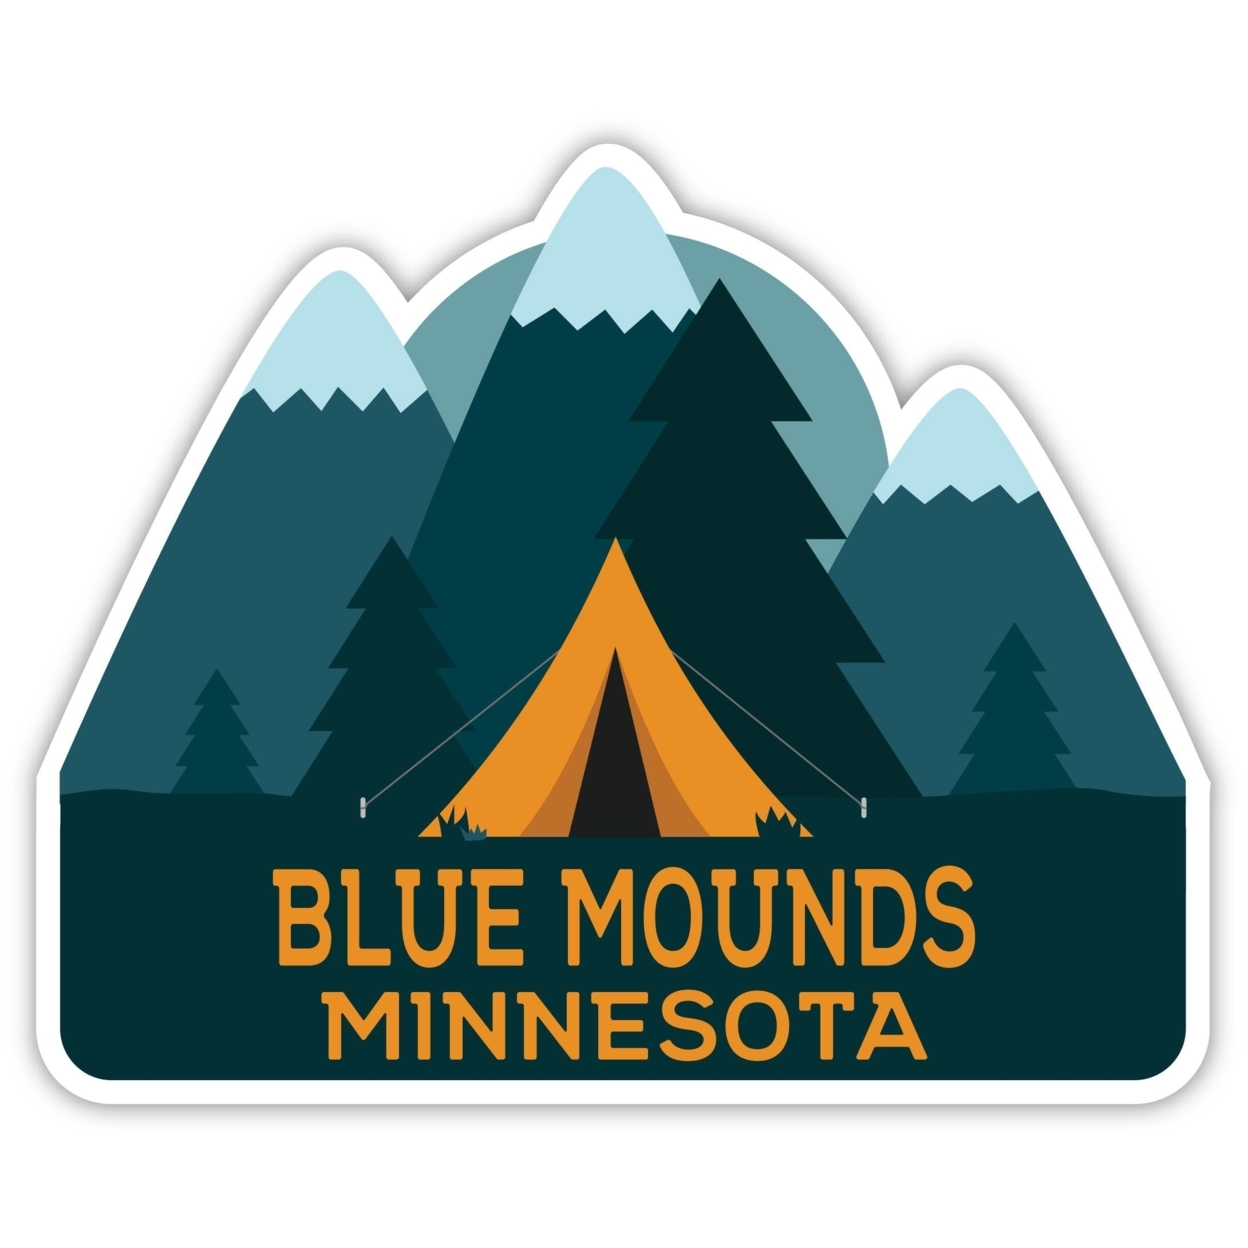 Blue Mounds Minnesota Souvenir Decorative Stickers (Choose Theme And Size) - 4-Pack, 8-Inch, Tent